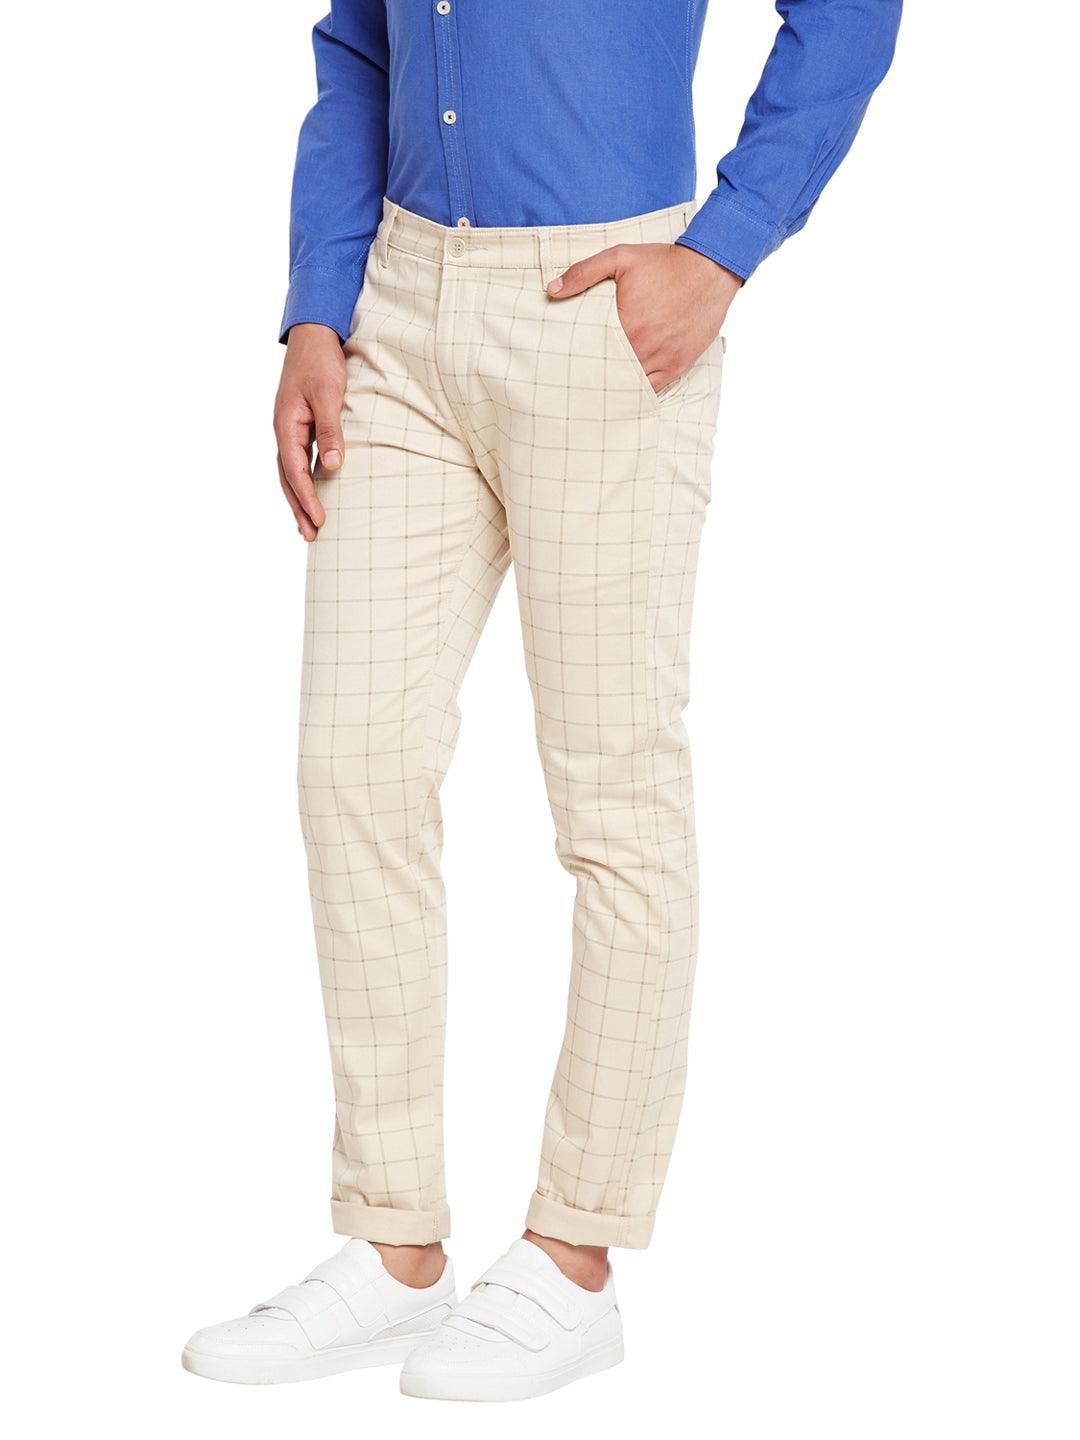 Men Beige Self Design Check Stretchable Mid Rise Slim Fit Chinos Trouser